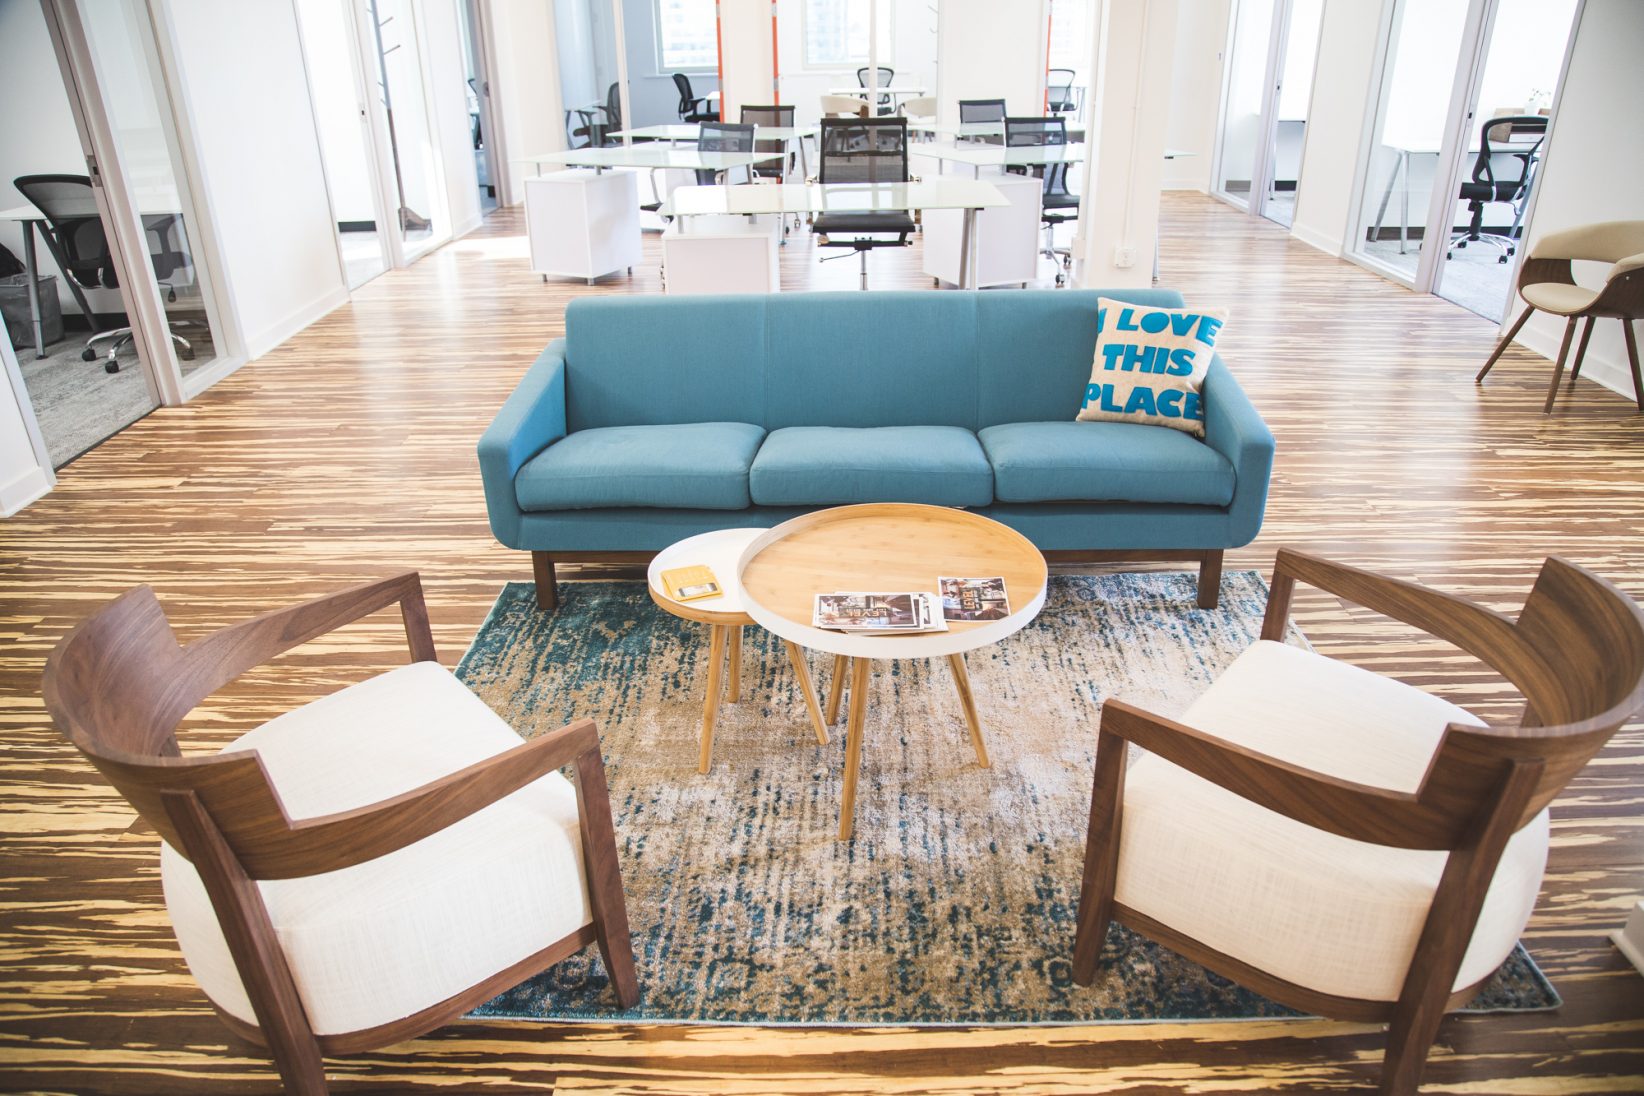 Level Office puts coworking space on tap in former law building (Photos)